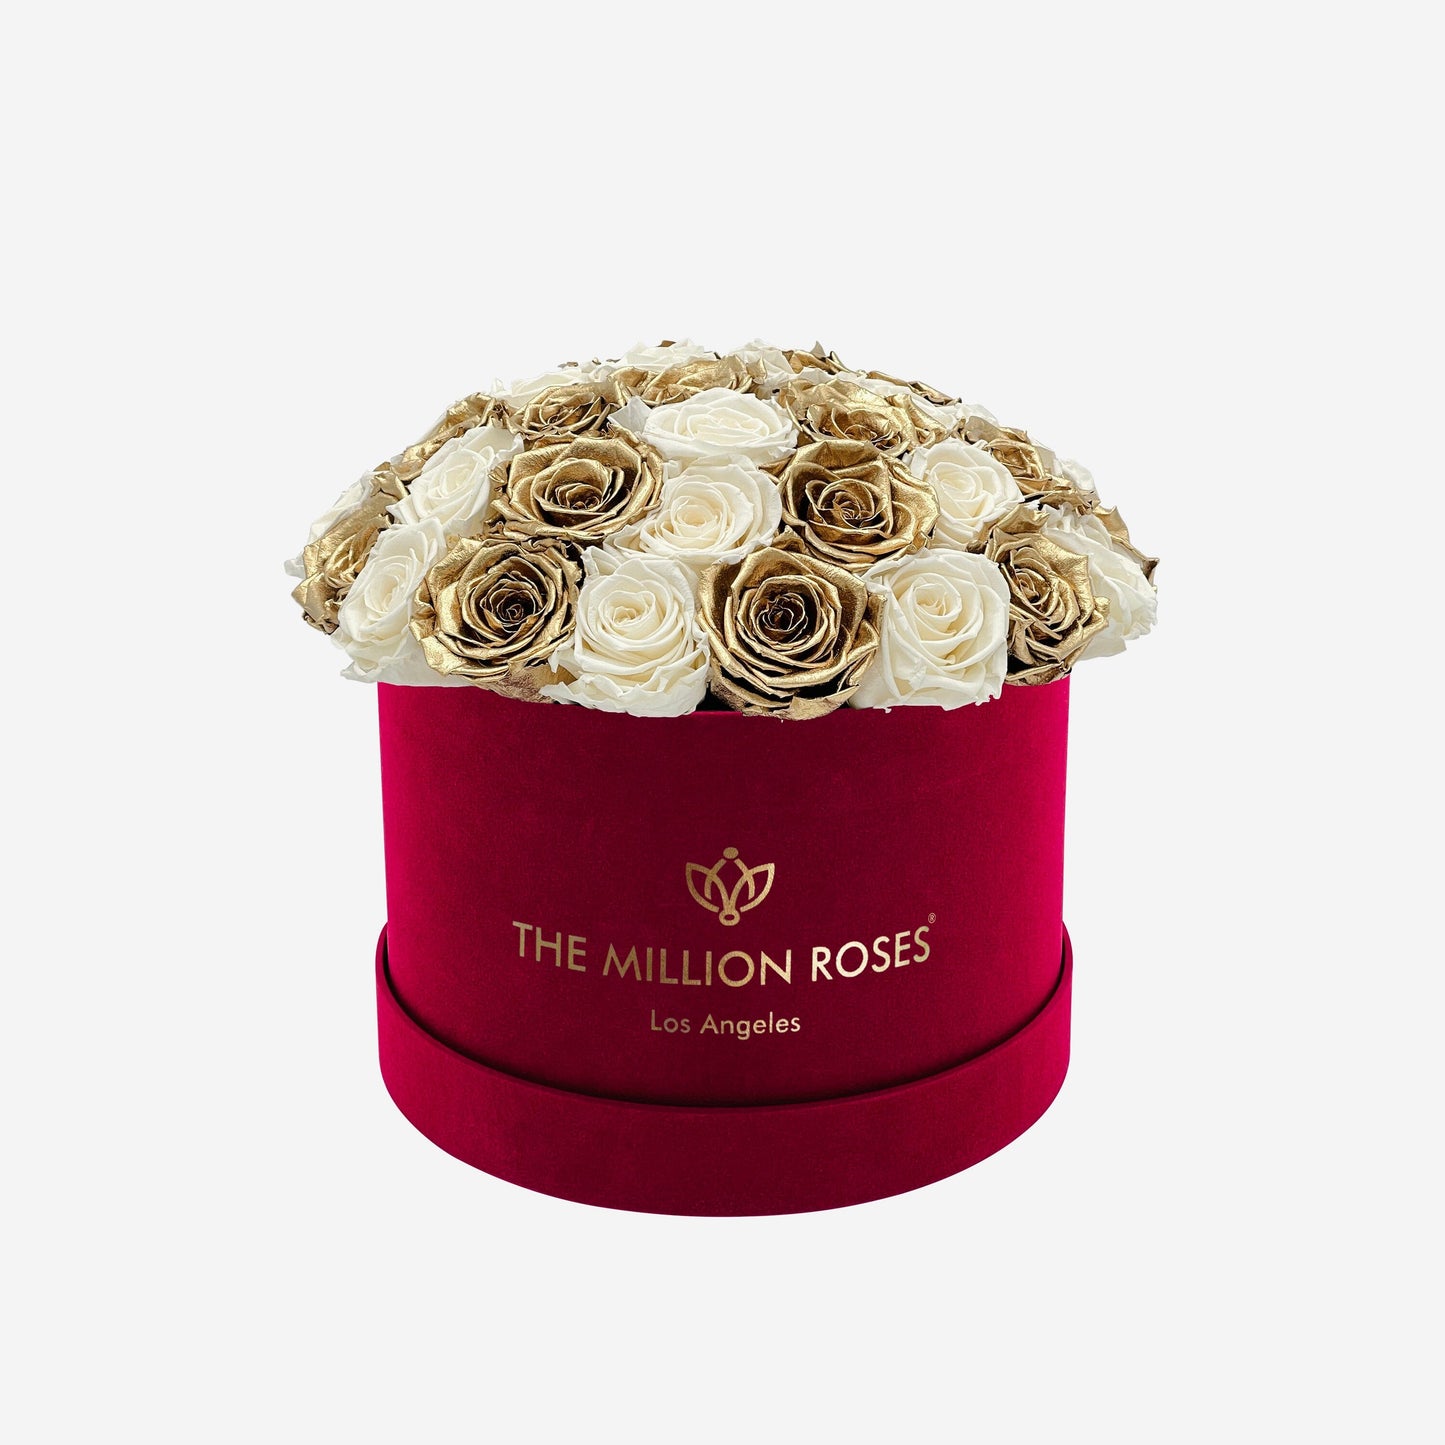 Supreme Bordeaux Suede Dome Box | White & Gold Roses - The Million Roses